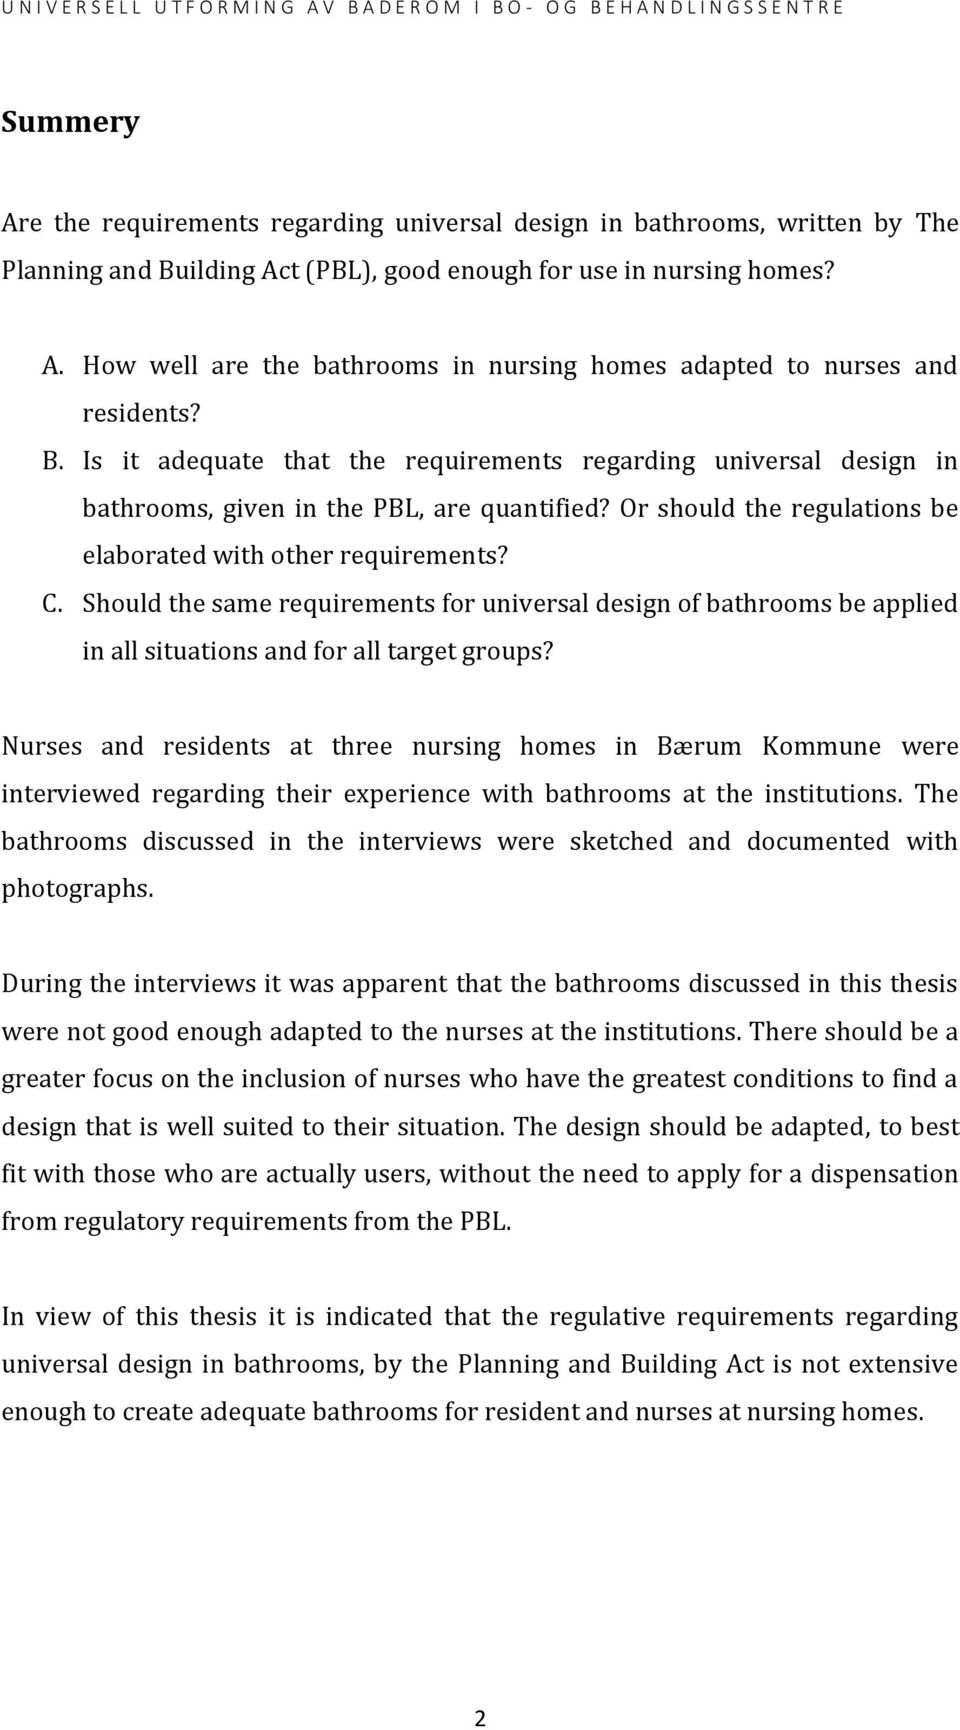 Should the same requirements for universal design of bathrooms be applied in all situations and for all target groups?